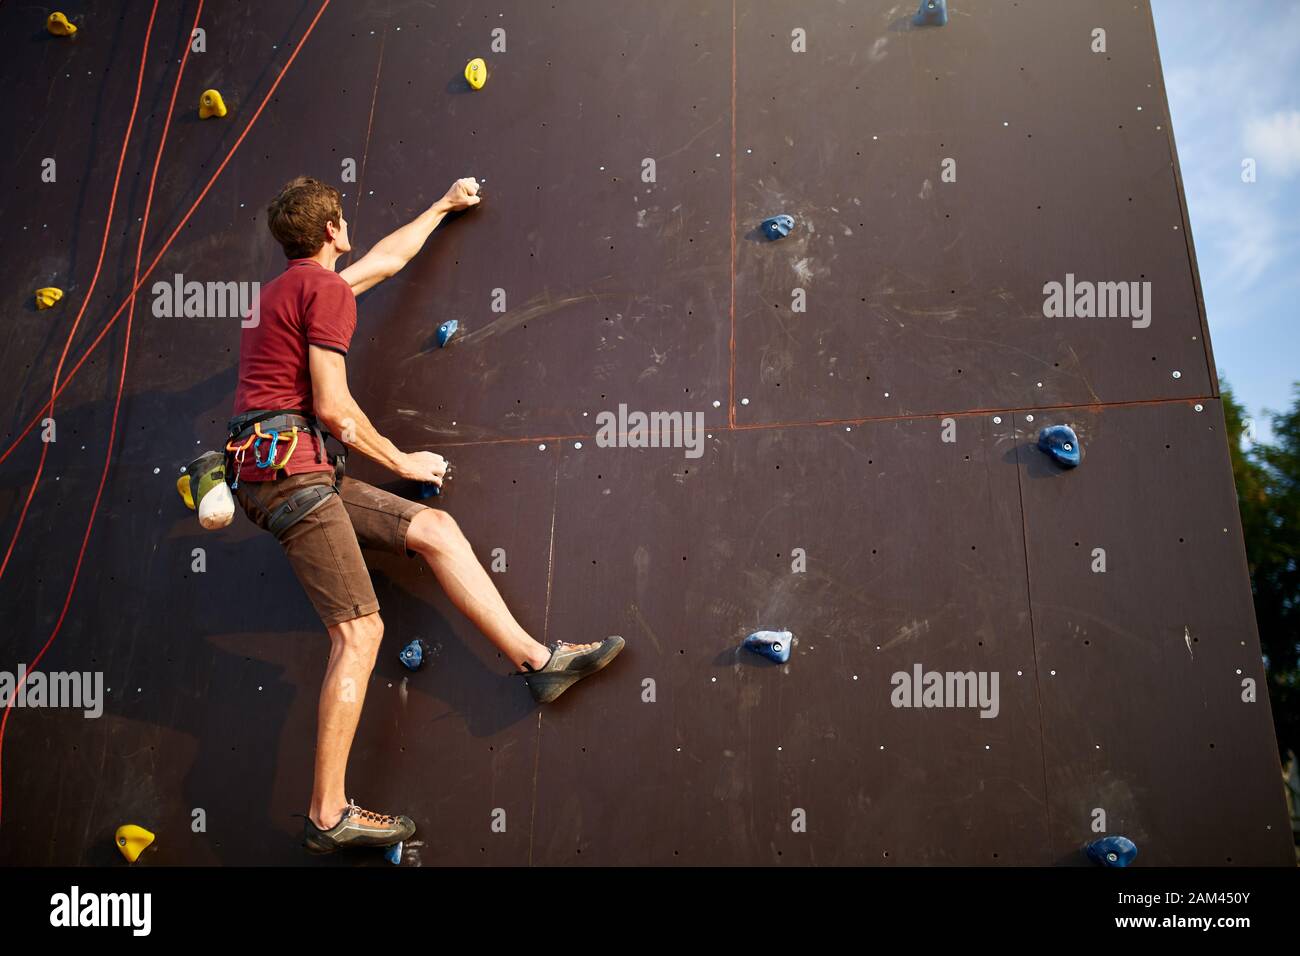 Sporty man practicing rock climbing in gym on artificial rock training wall outdoors. Young talanted slim climber guy on workout. Stock Photo